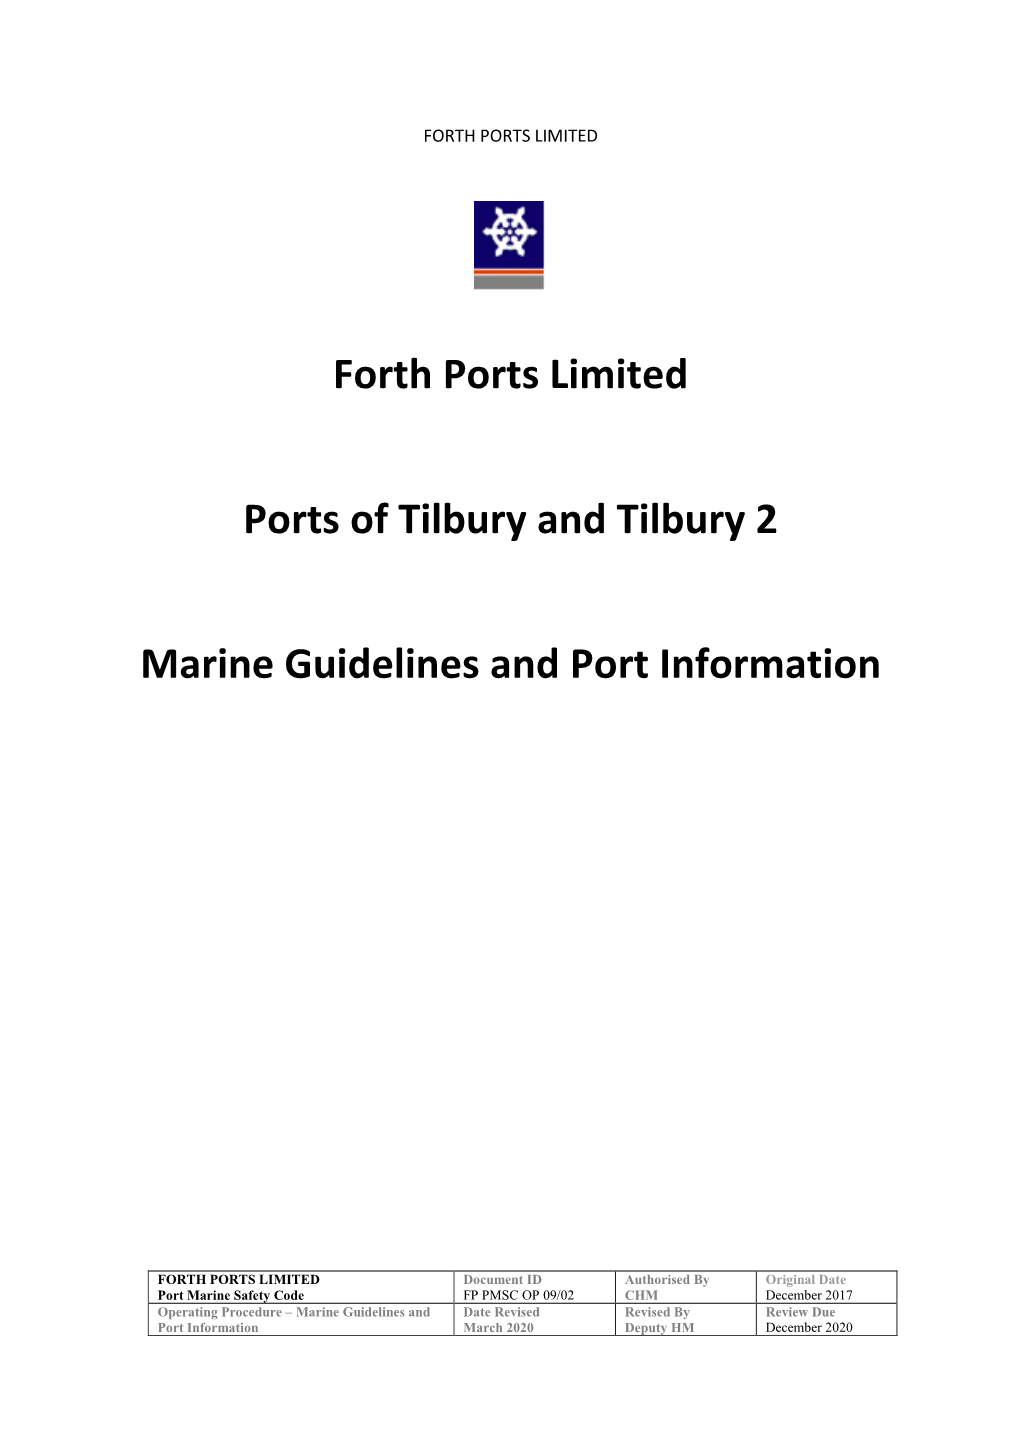 Forth Ports Limited Ports of Tilbury and Tilbury 2 Marine Guidelines